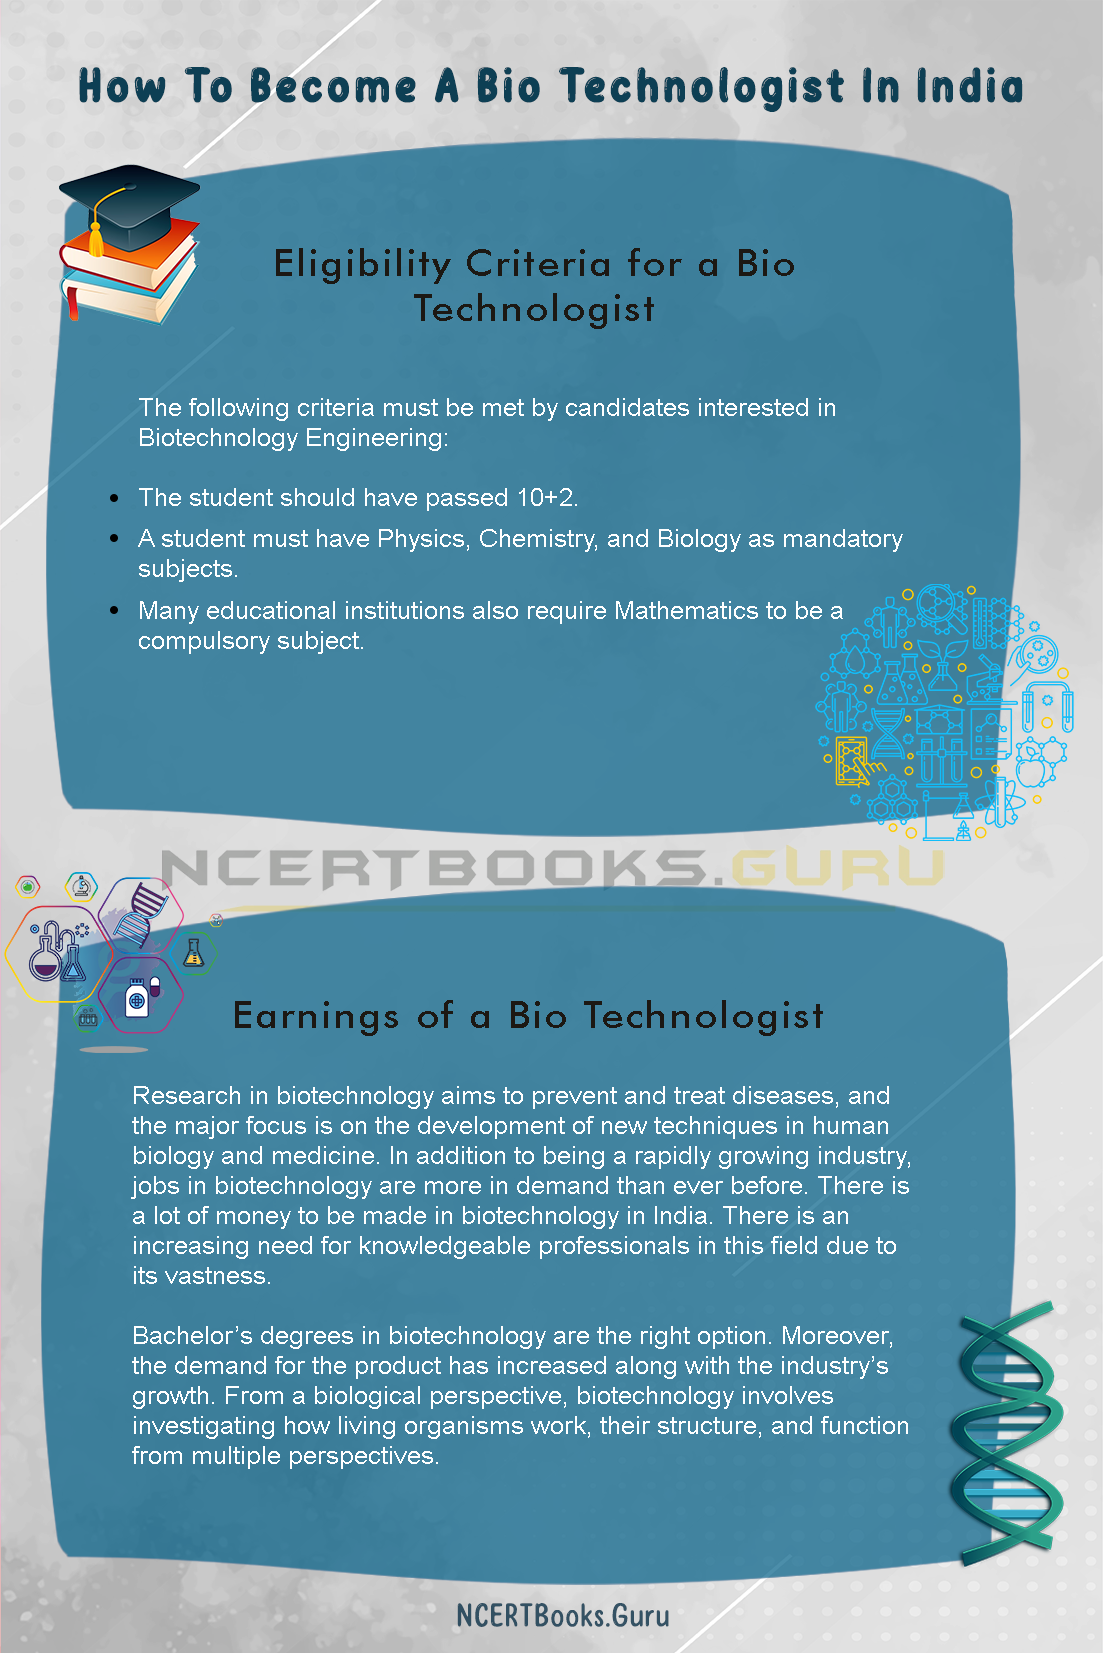 How To Become A Bio Technologist In India